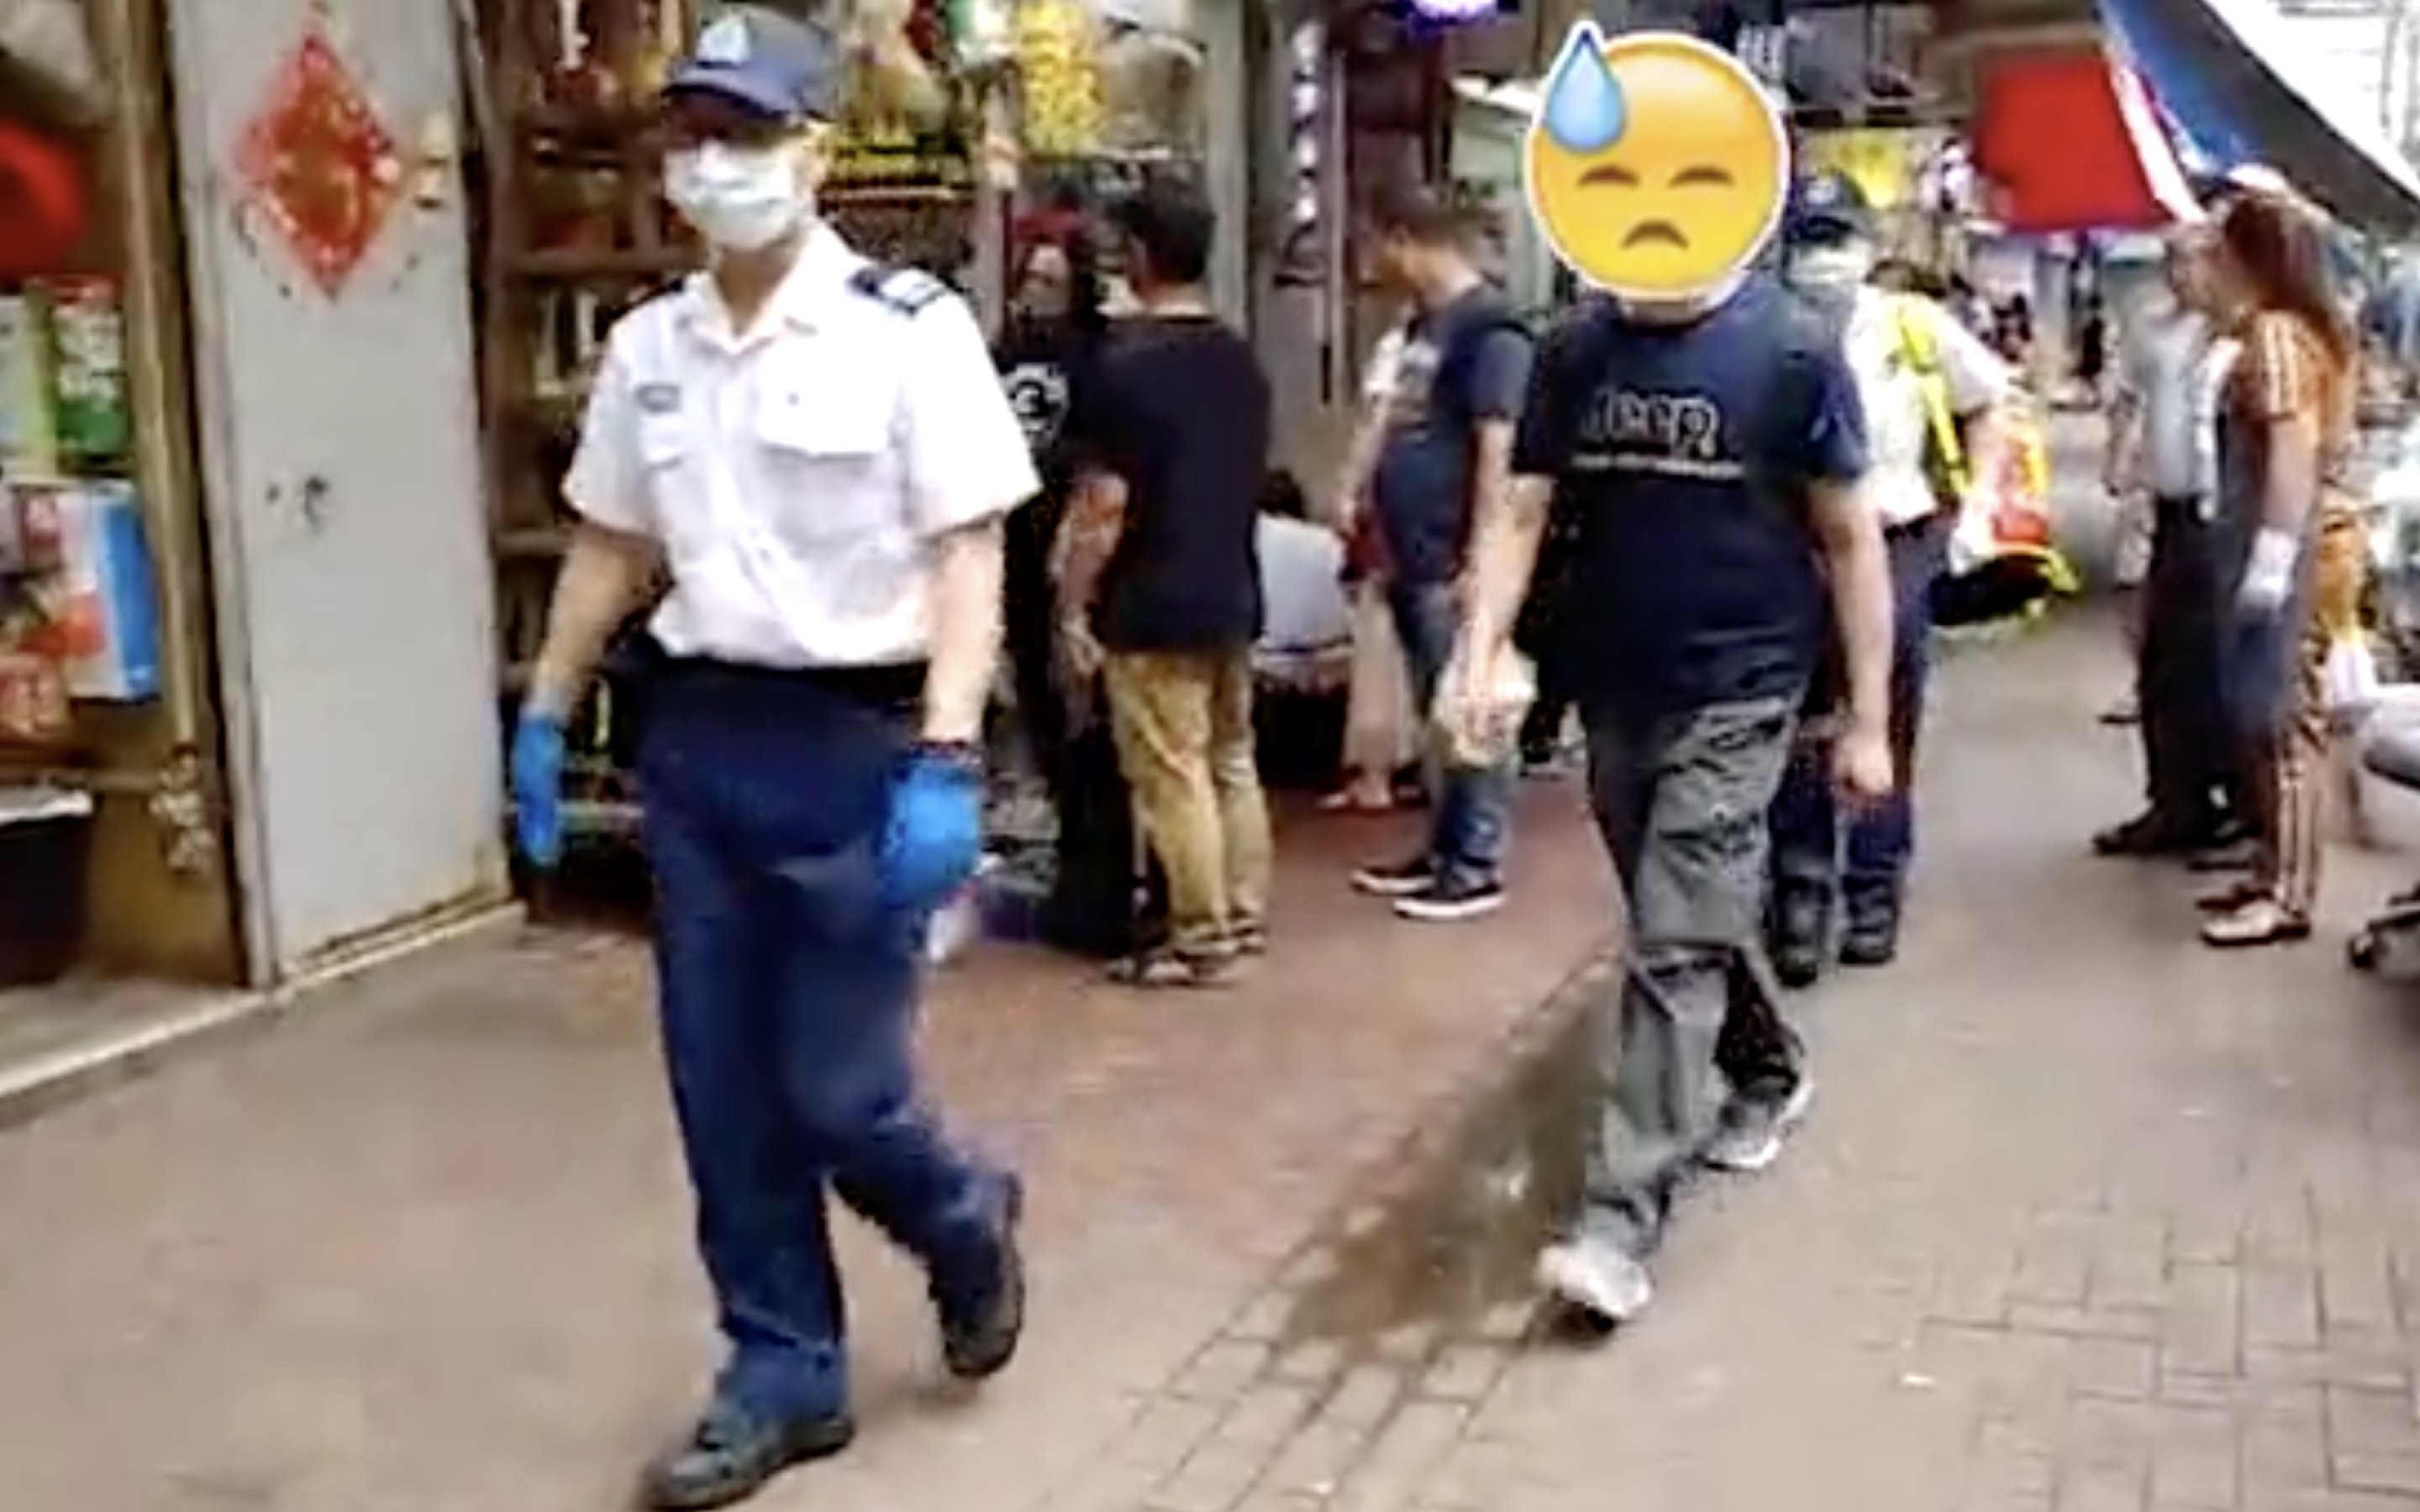 The victim of an attempted robbery is escorted by police in Tuen Wan yesterday. Screengrab via Apple Daily video.